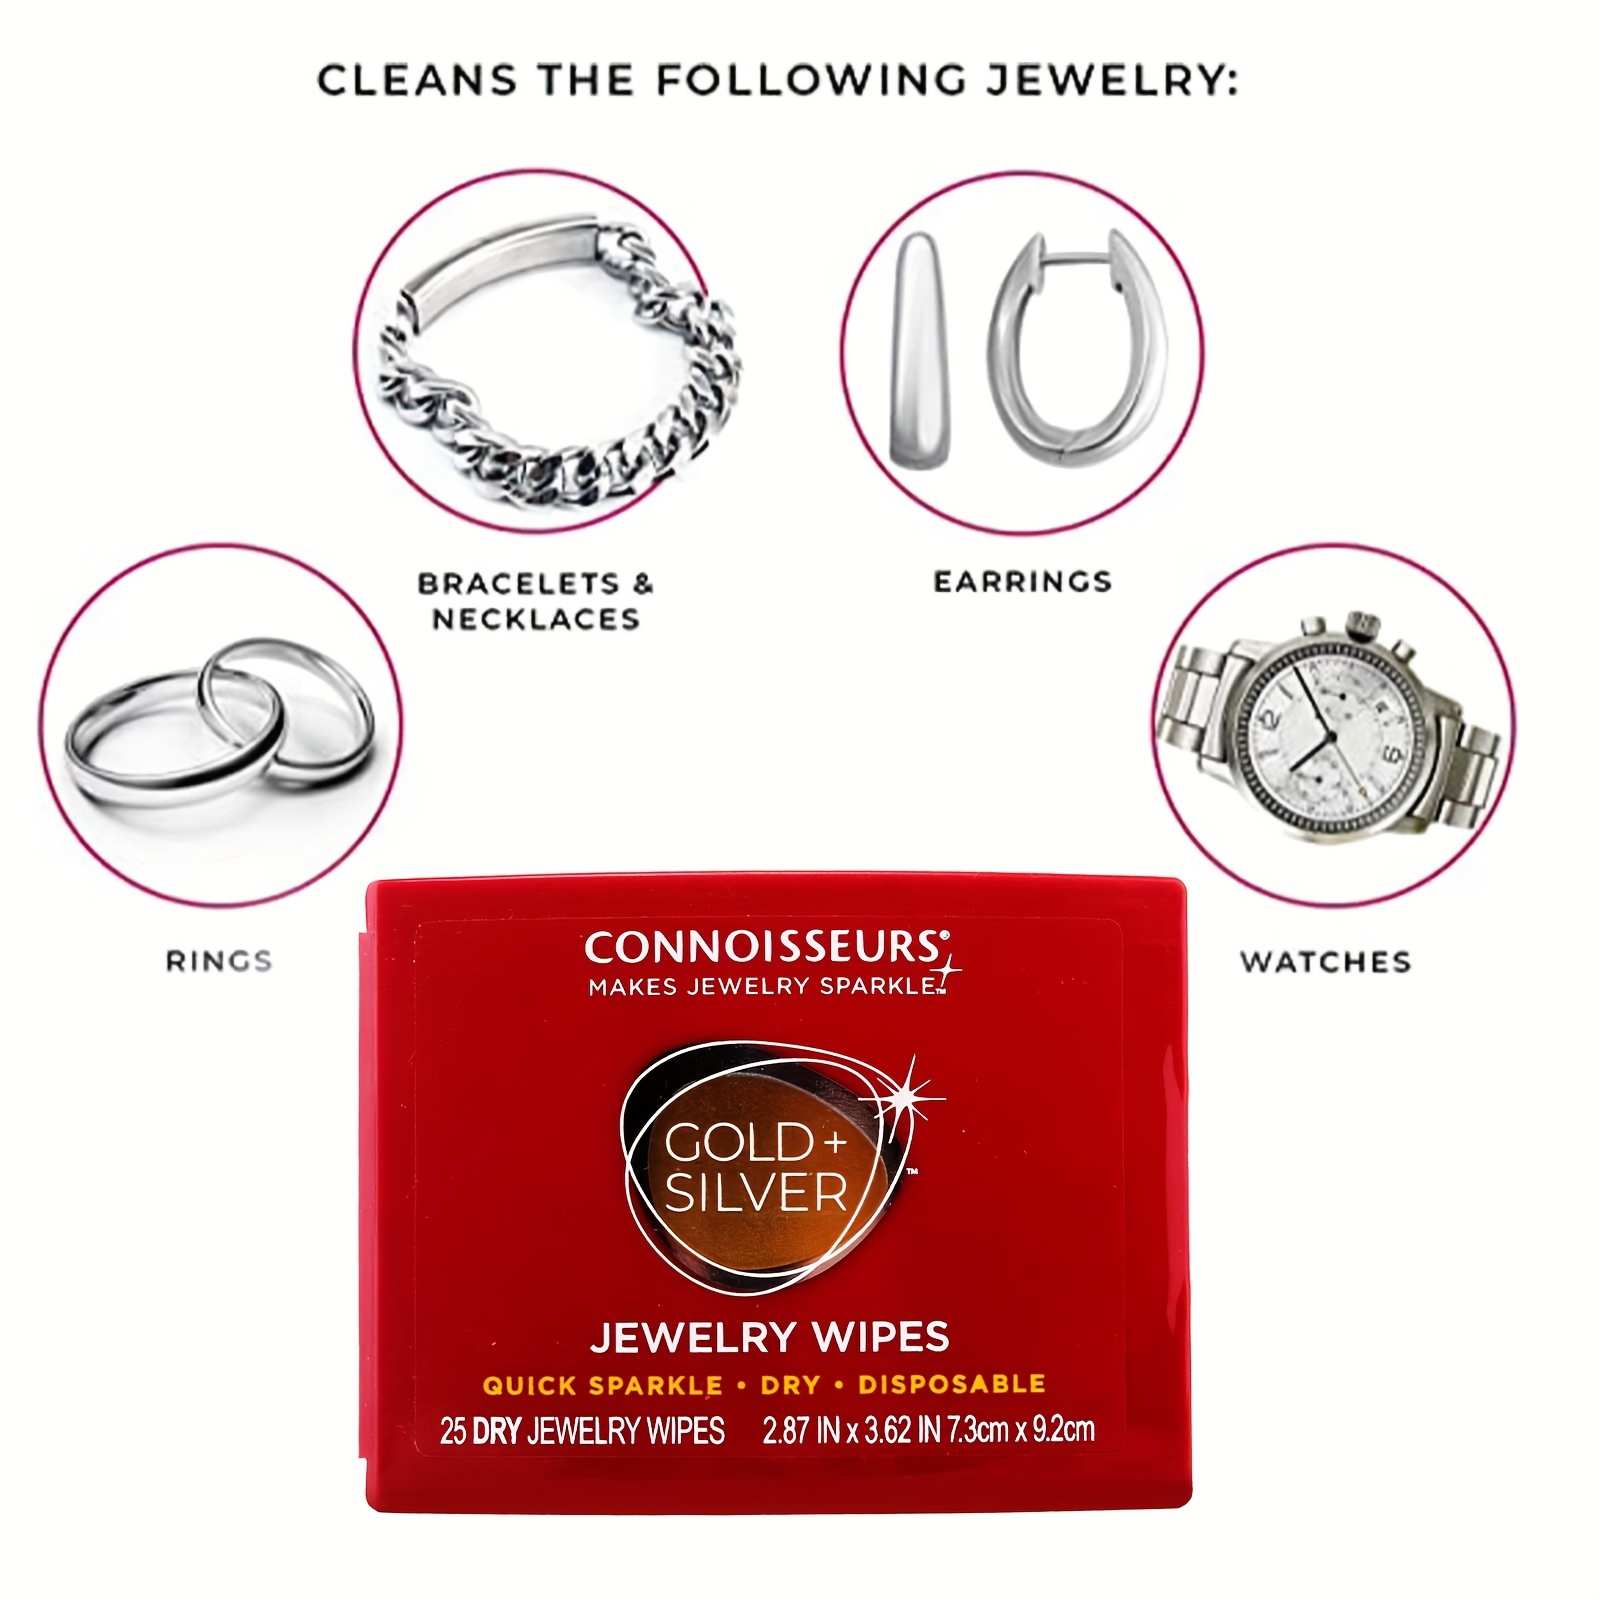 CONNOISSEUR JEWELRY WIPES